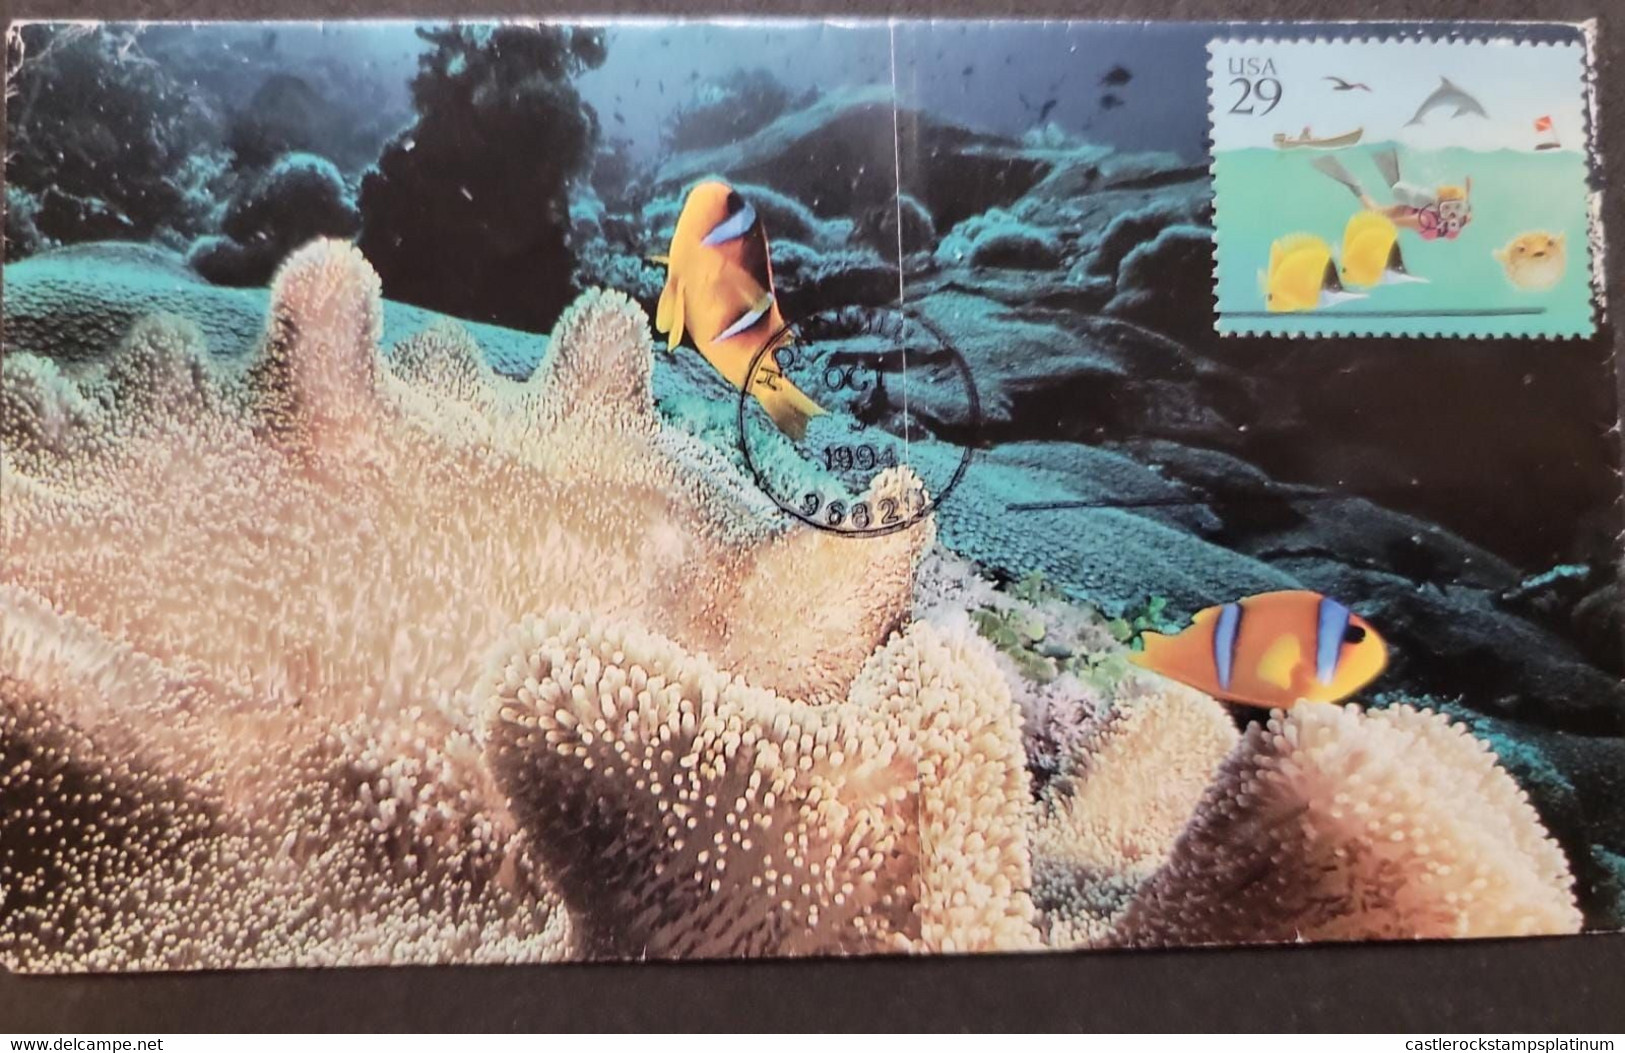 SB) 1994 UNITED STATES - USA,  WONDER OF THE SEA, DIVER, MOTORBOAT, FISHES, MARINE LIFE, FDC XF - 1991-2000